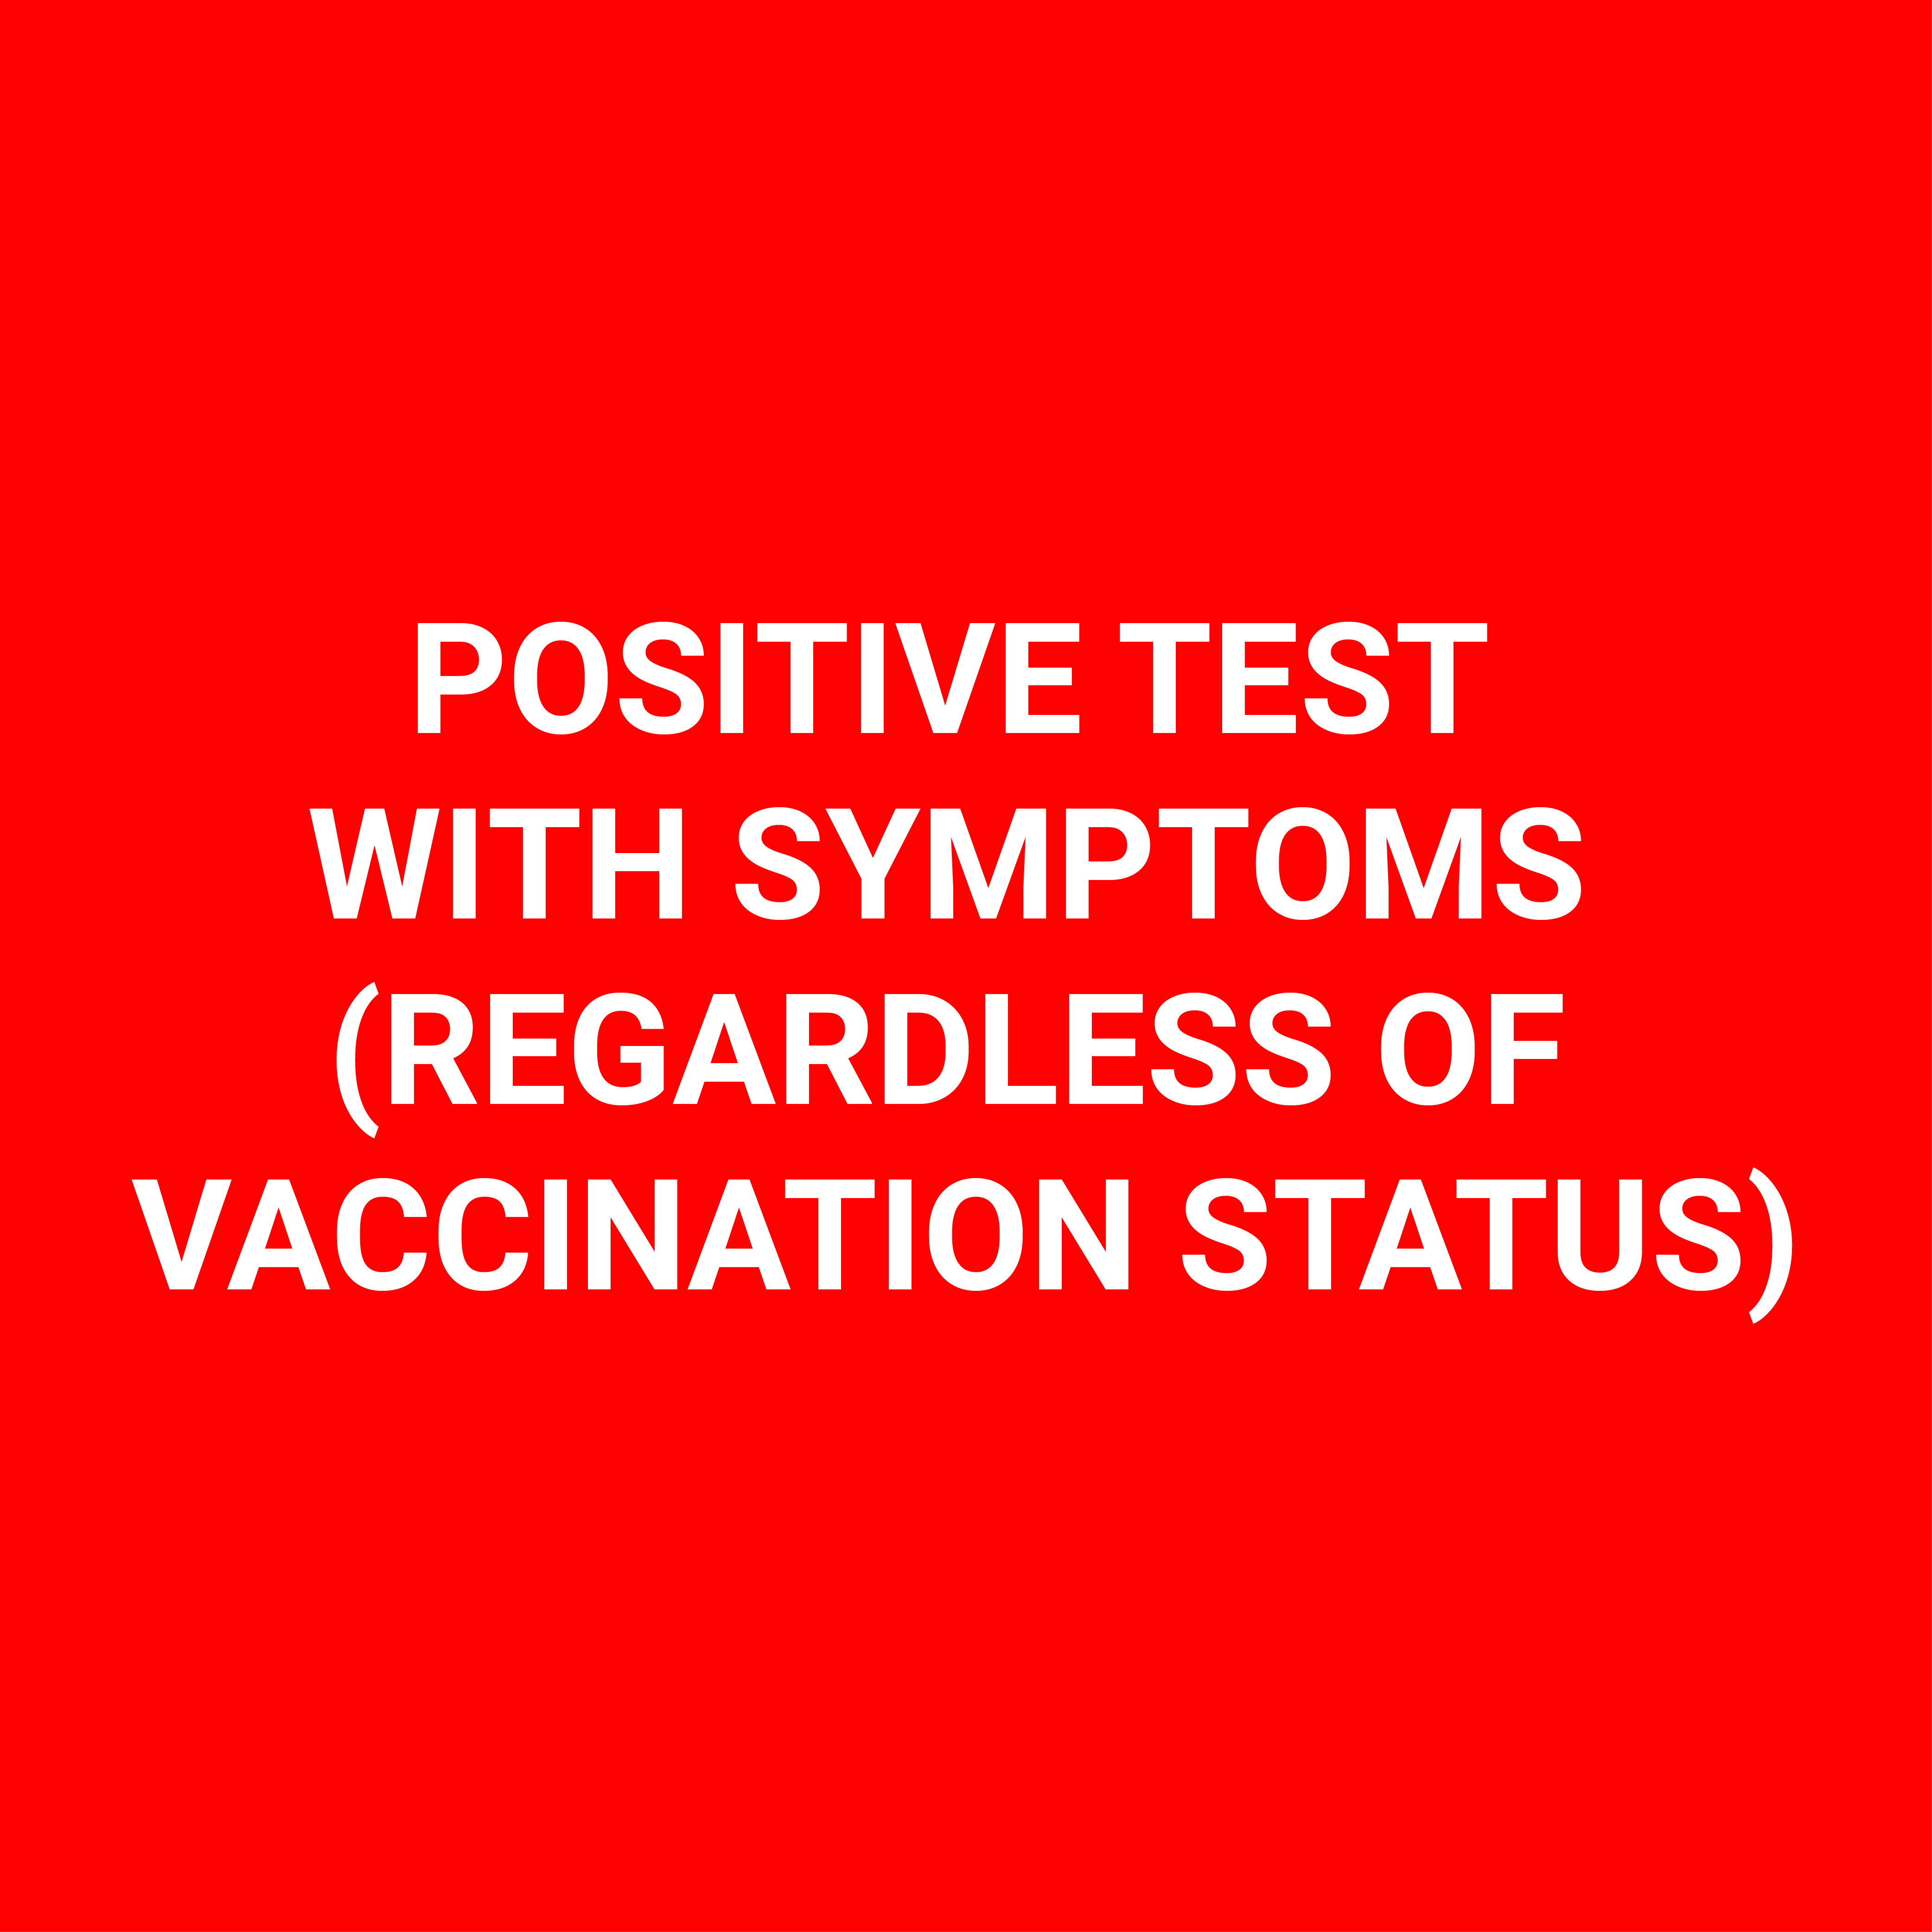 Positive Test with symptoms (regardless of vaccination status)